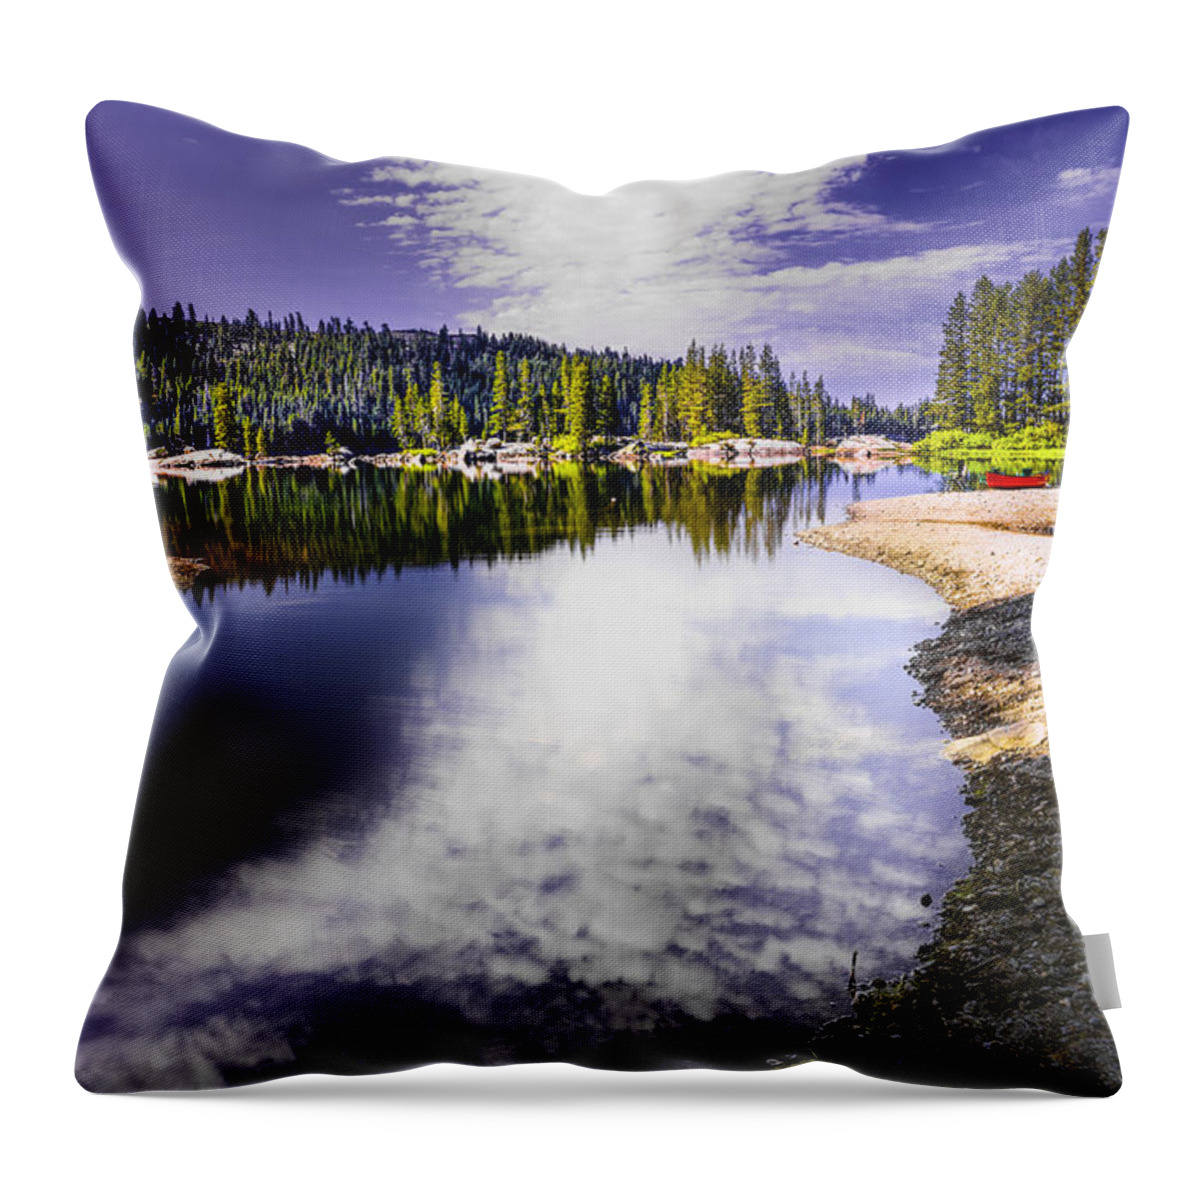 Lake Alpine Throw Pillow featuring the photograph Lake Alpine by Don Hoekwater Photography